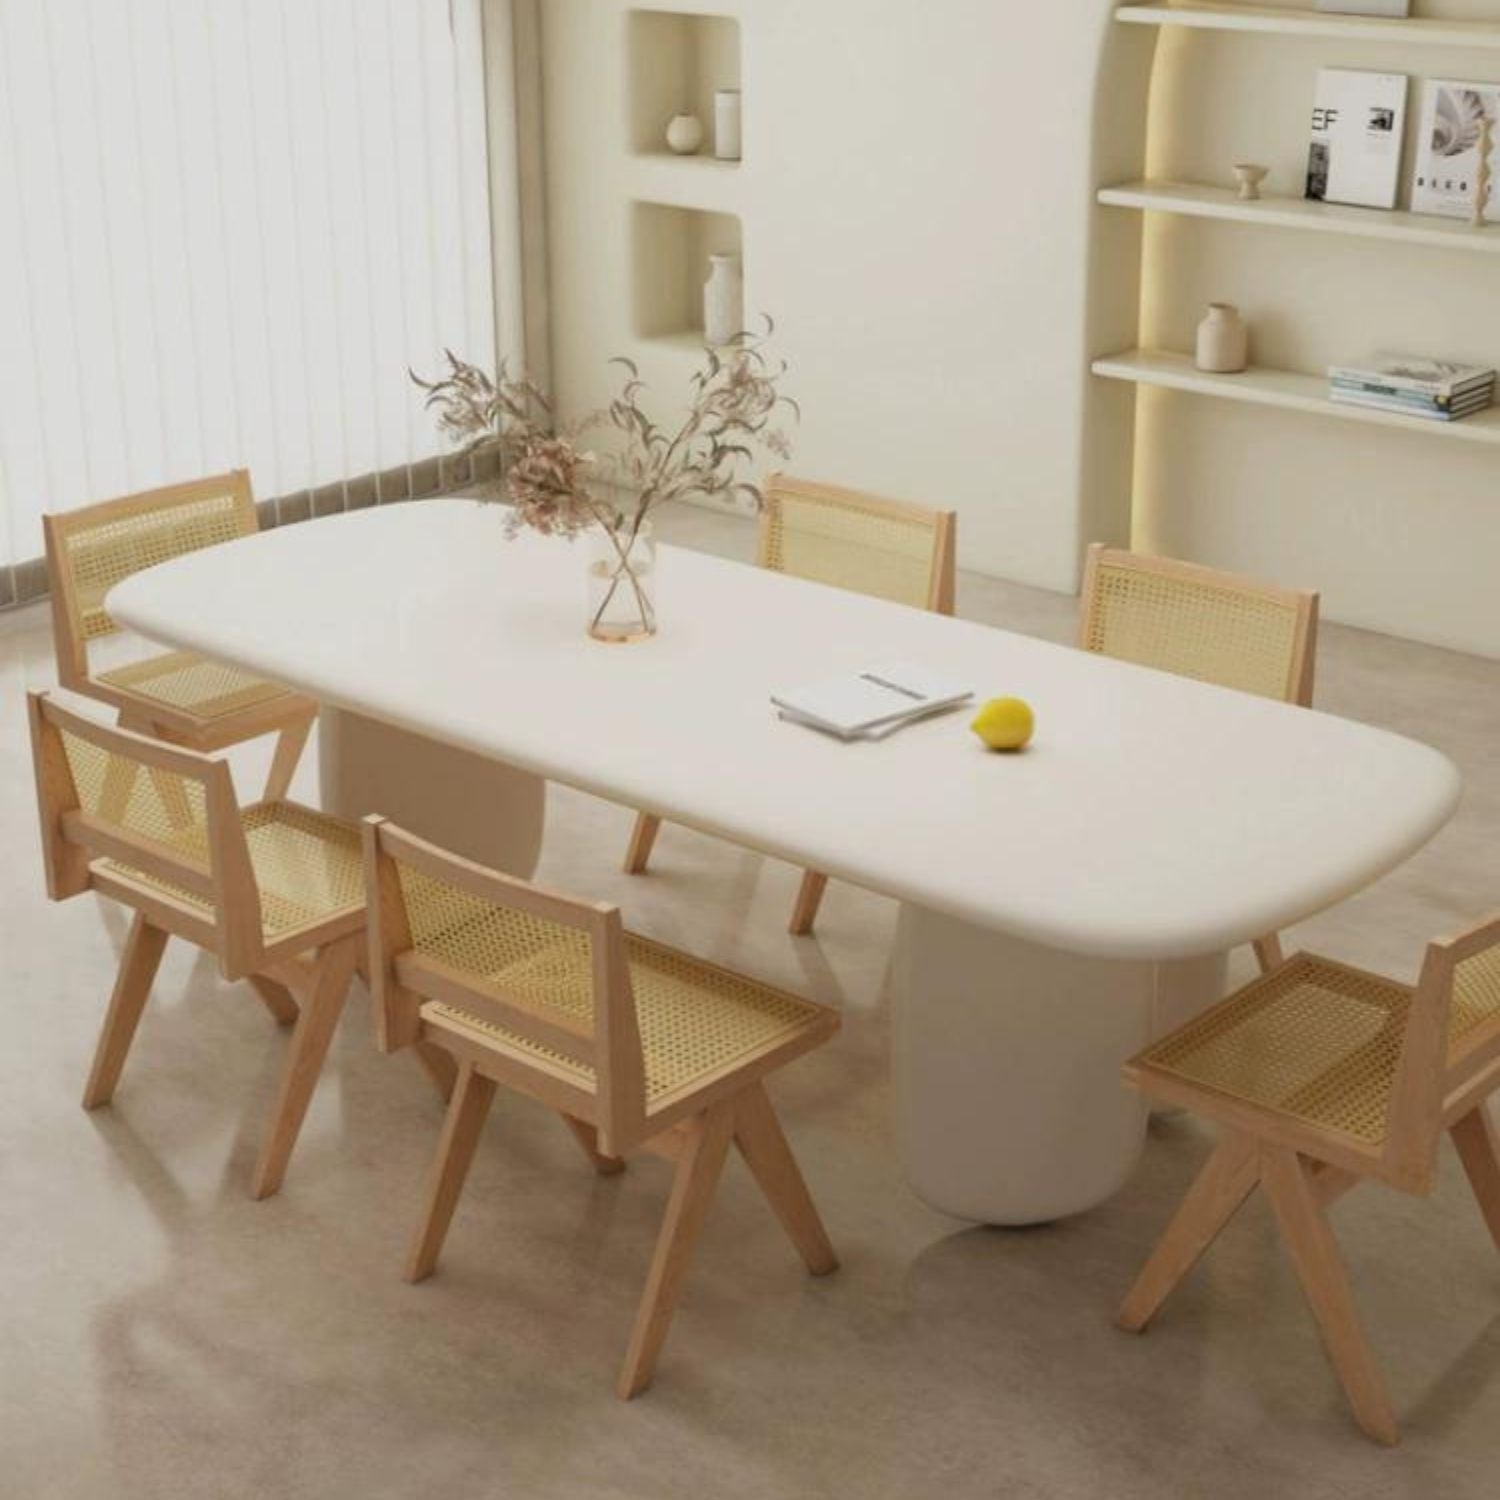 Canyon Dining Table